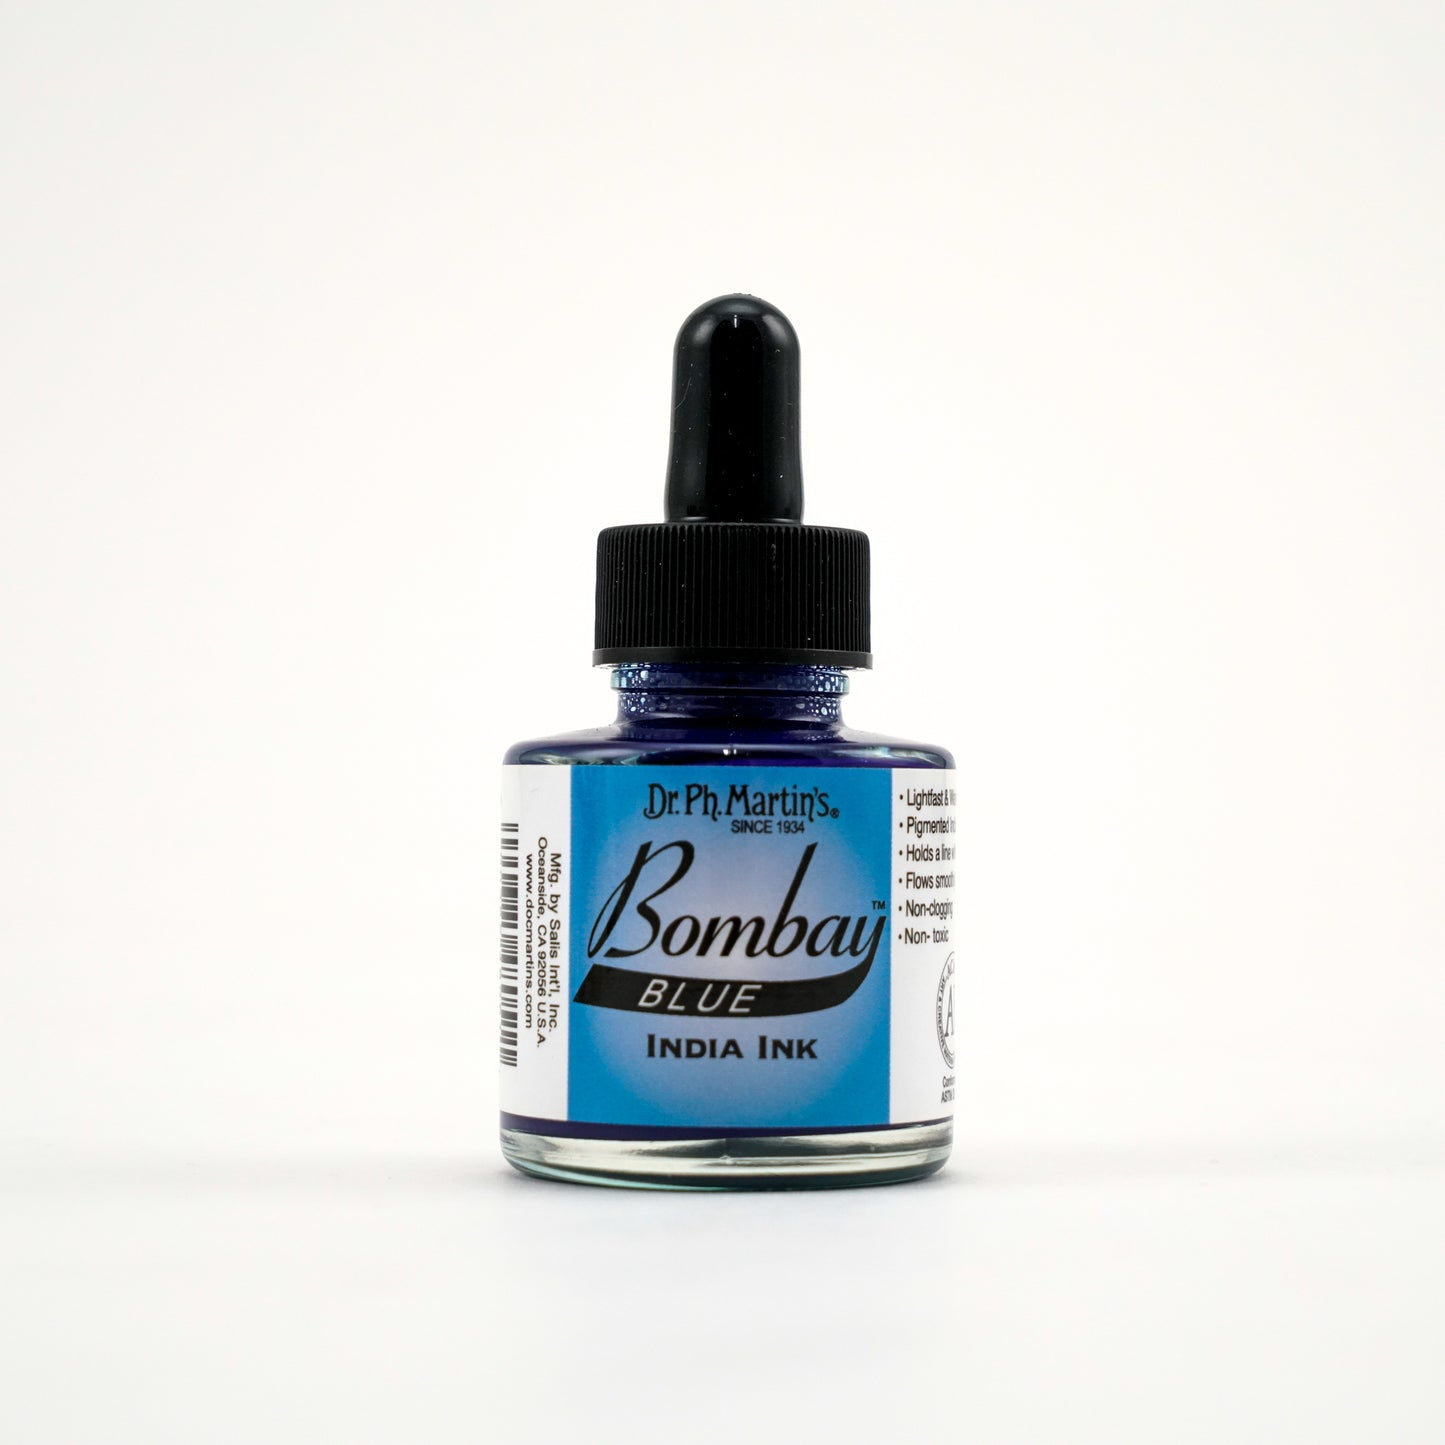 Dr. Ph. Martin's Bombay India Ink - Blue by Dr. Ph. Martin’s - K. A. Artist Shop